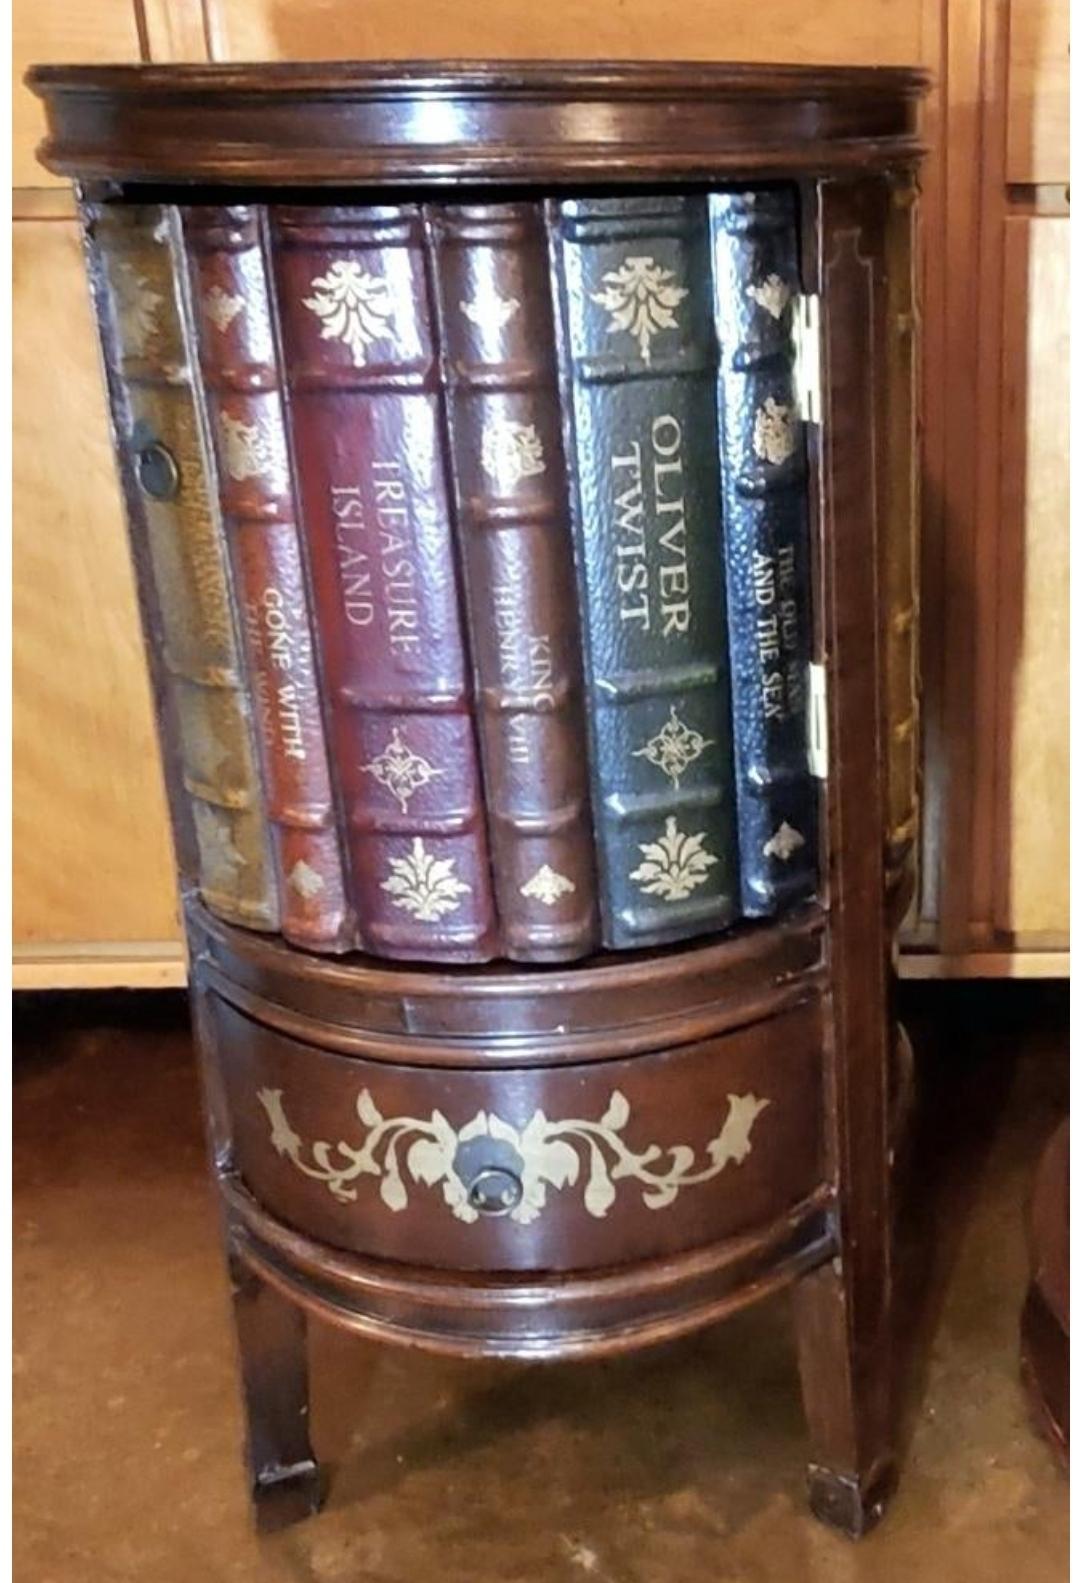 Vintage trompe l'oeil/ faux book round side table.
In the romantic, figurative style of Maitland Smith. 
Hand tooled leather bindings with gold writing adorn the exterior and also adorn the door.
Small drawer with pull.
Door also has a brass ring